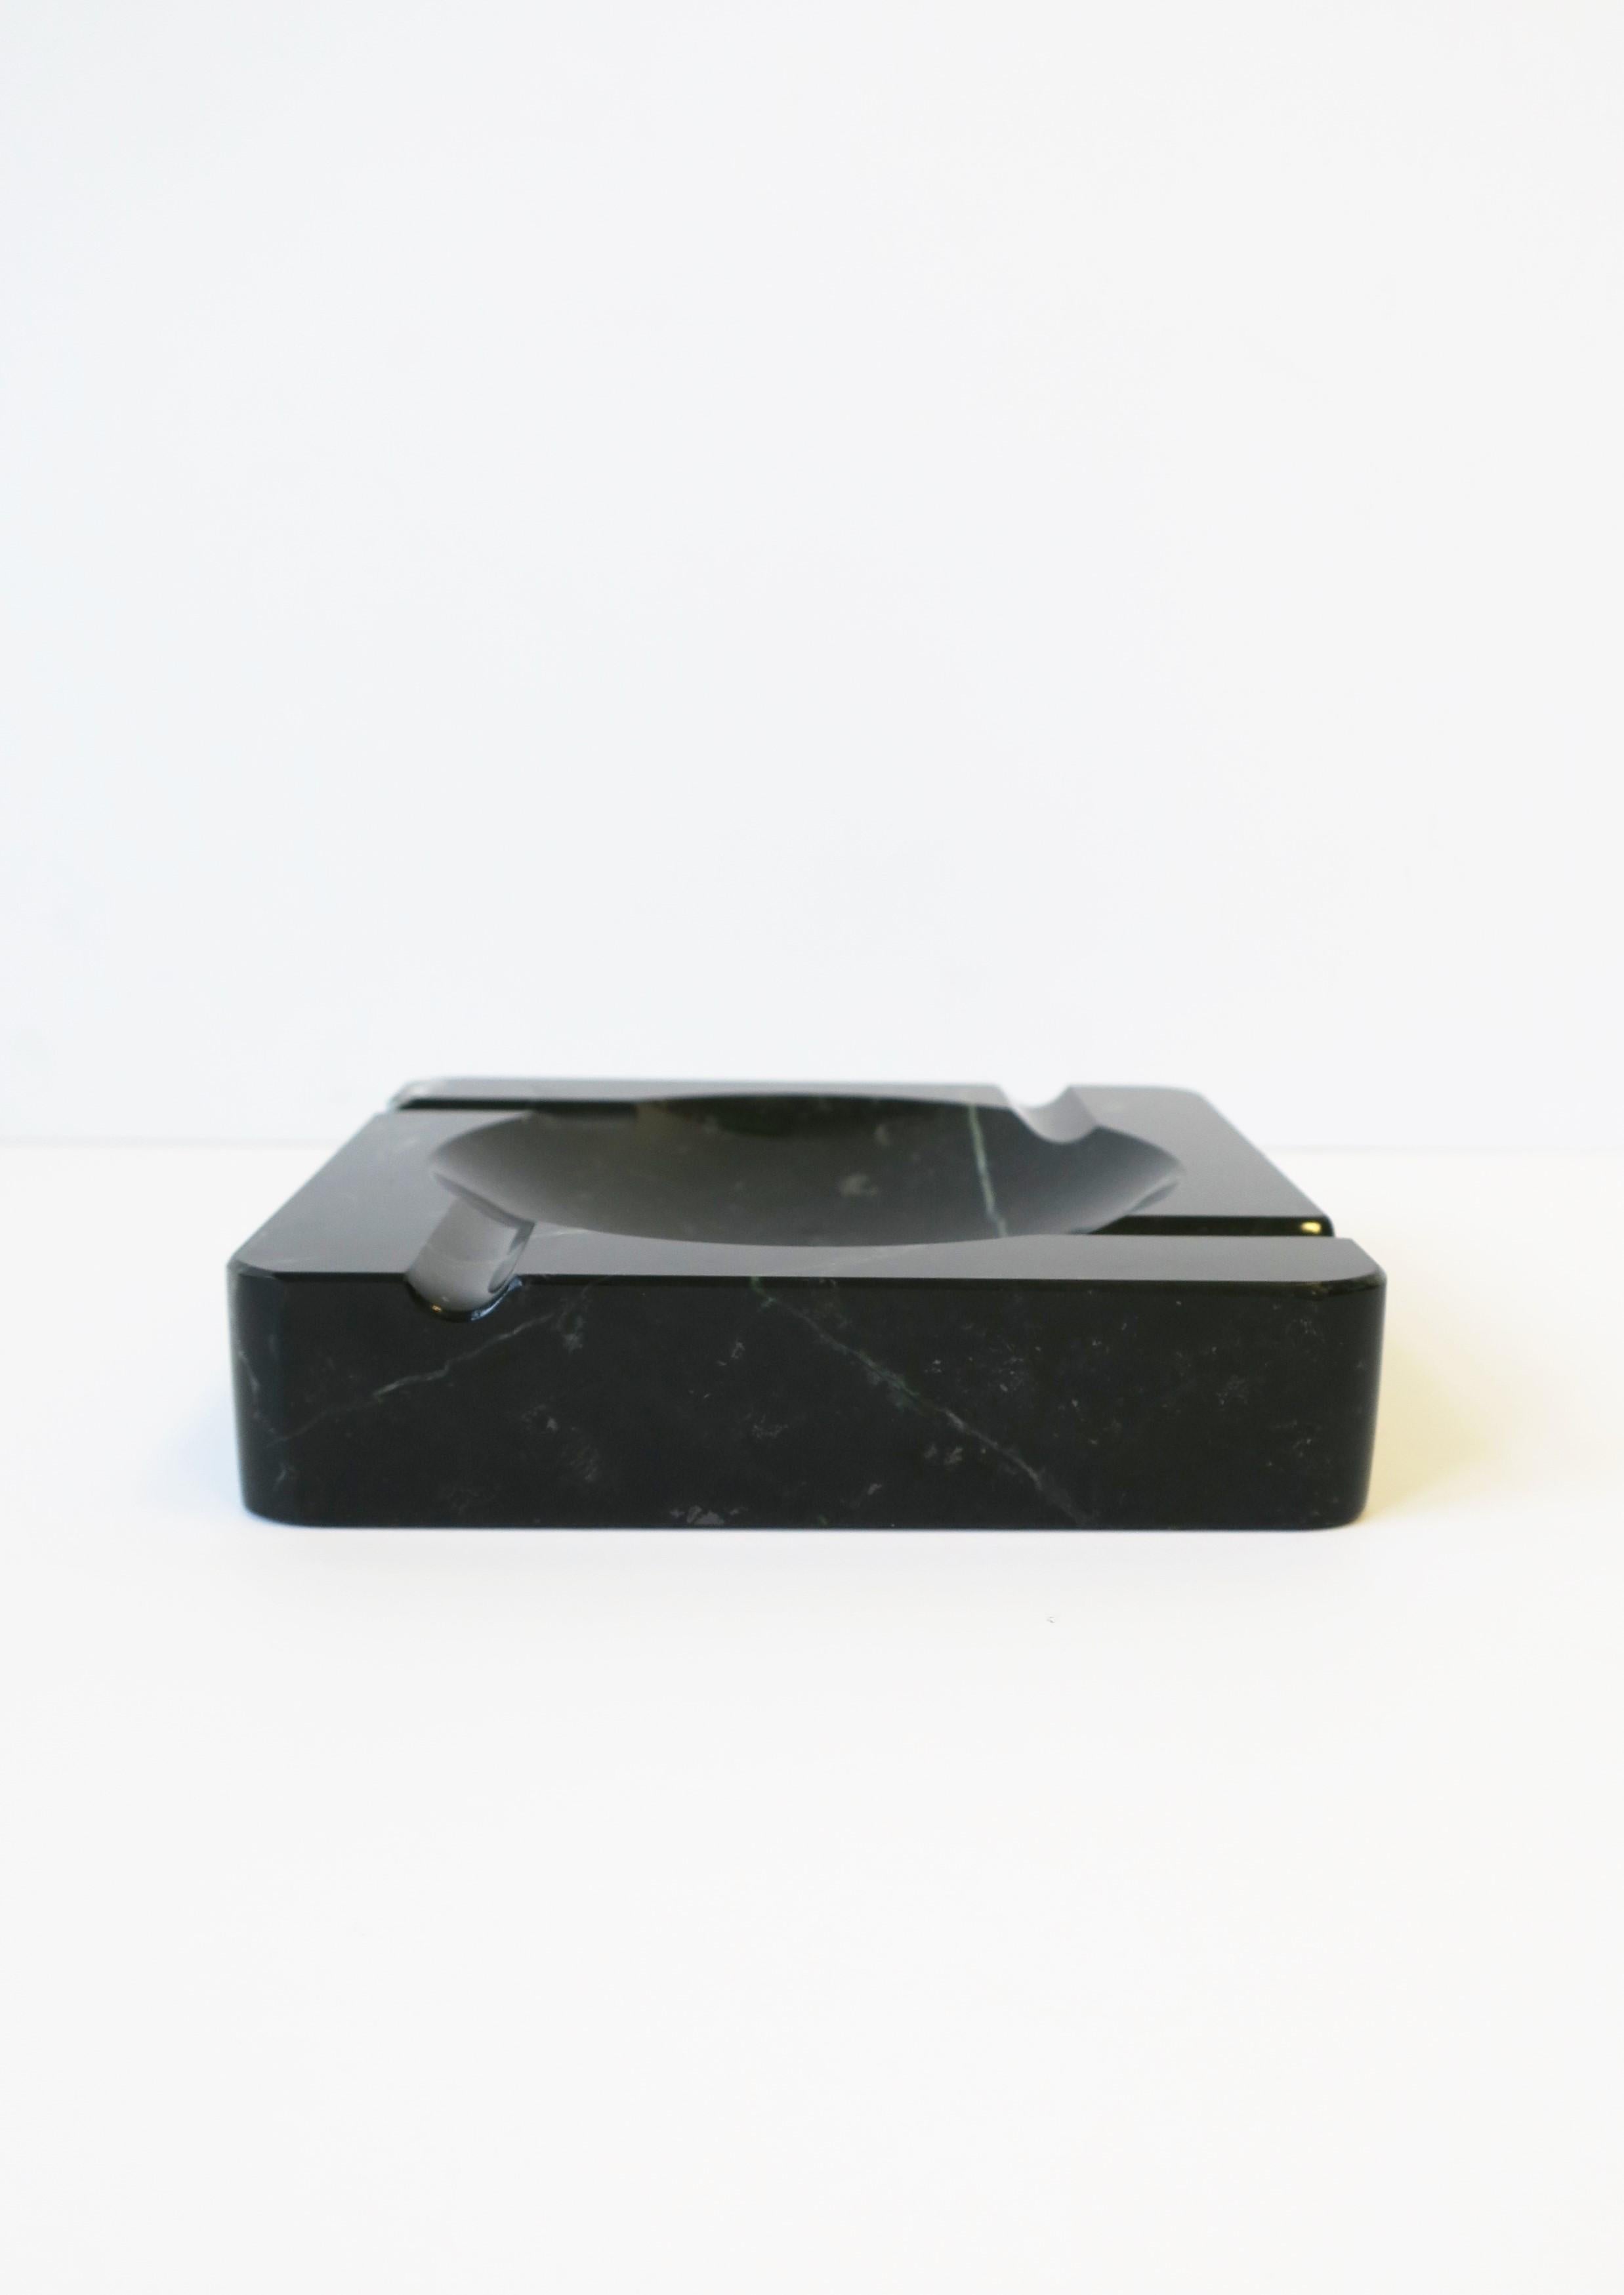 Italian Marble Catchall Vide-Poche or Ashtray, Italy 1970s For Sale 4